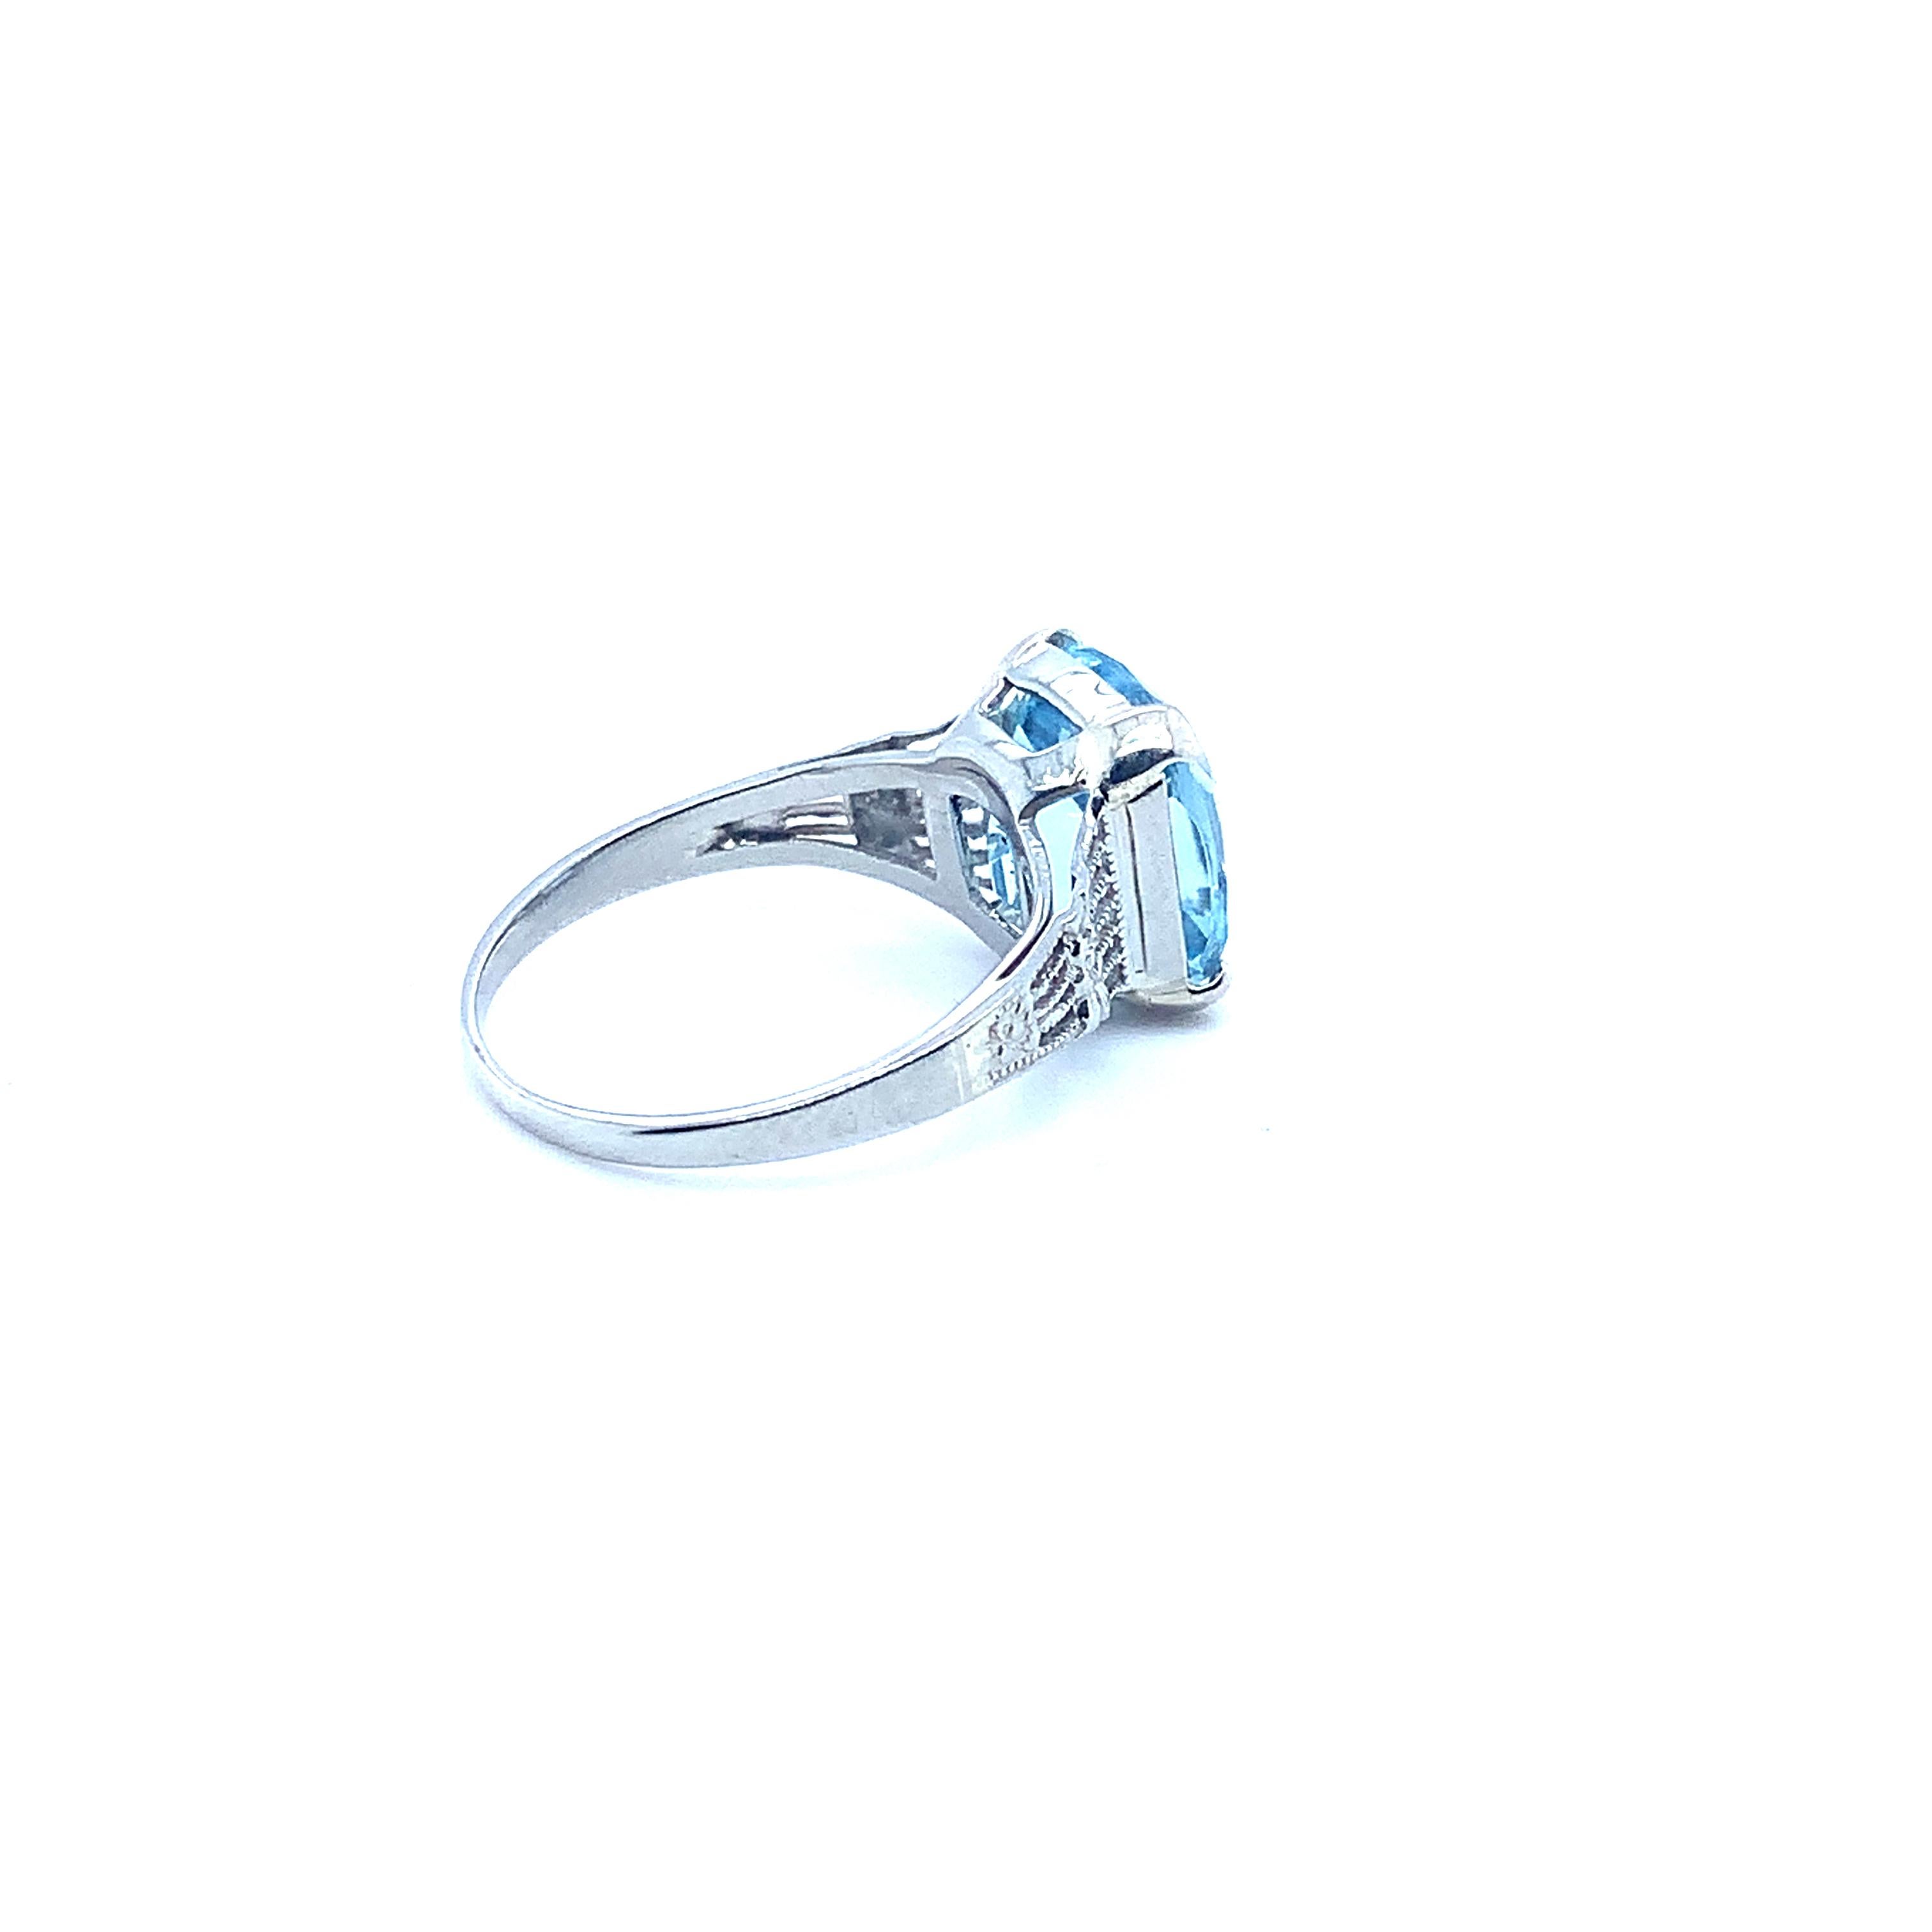 14K White Gold 3.43 Carat Antique Cushion Cut Aquamarine Ring #J5210 In Excellent Condition For Sale In Big Bend, WI